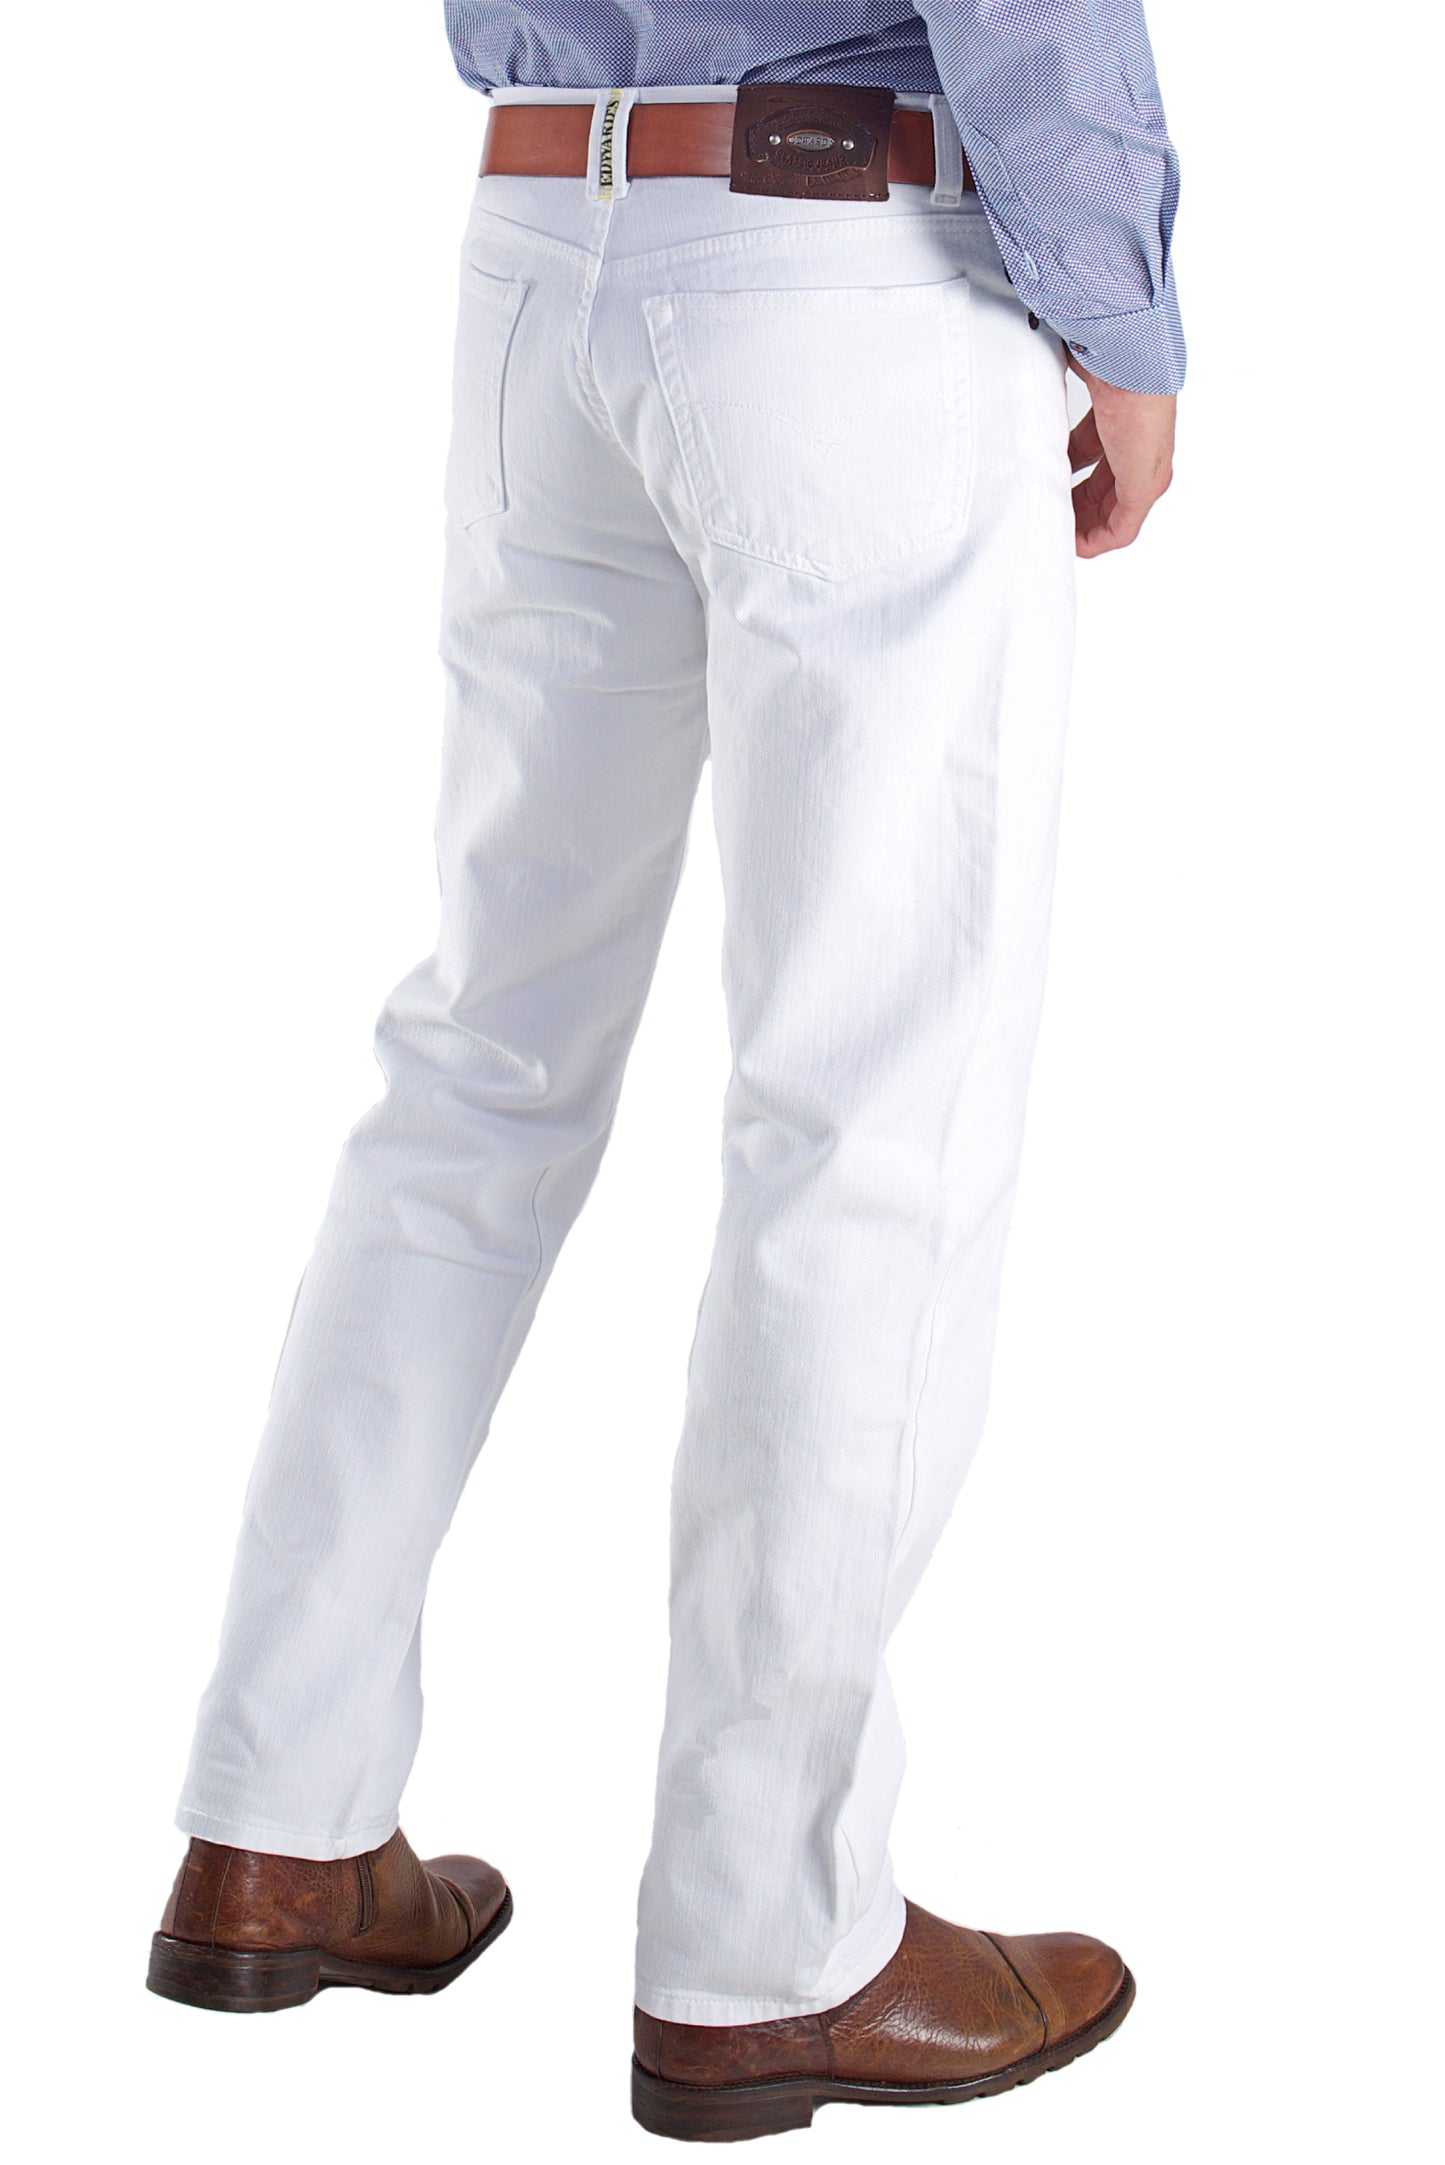 Jeans Classic White Soft